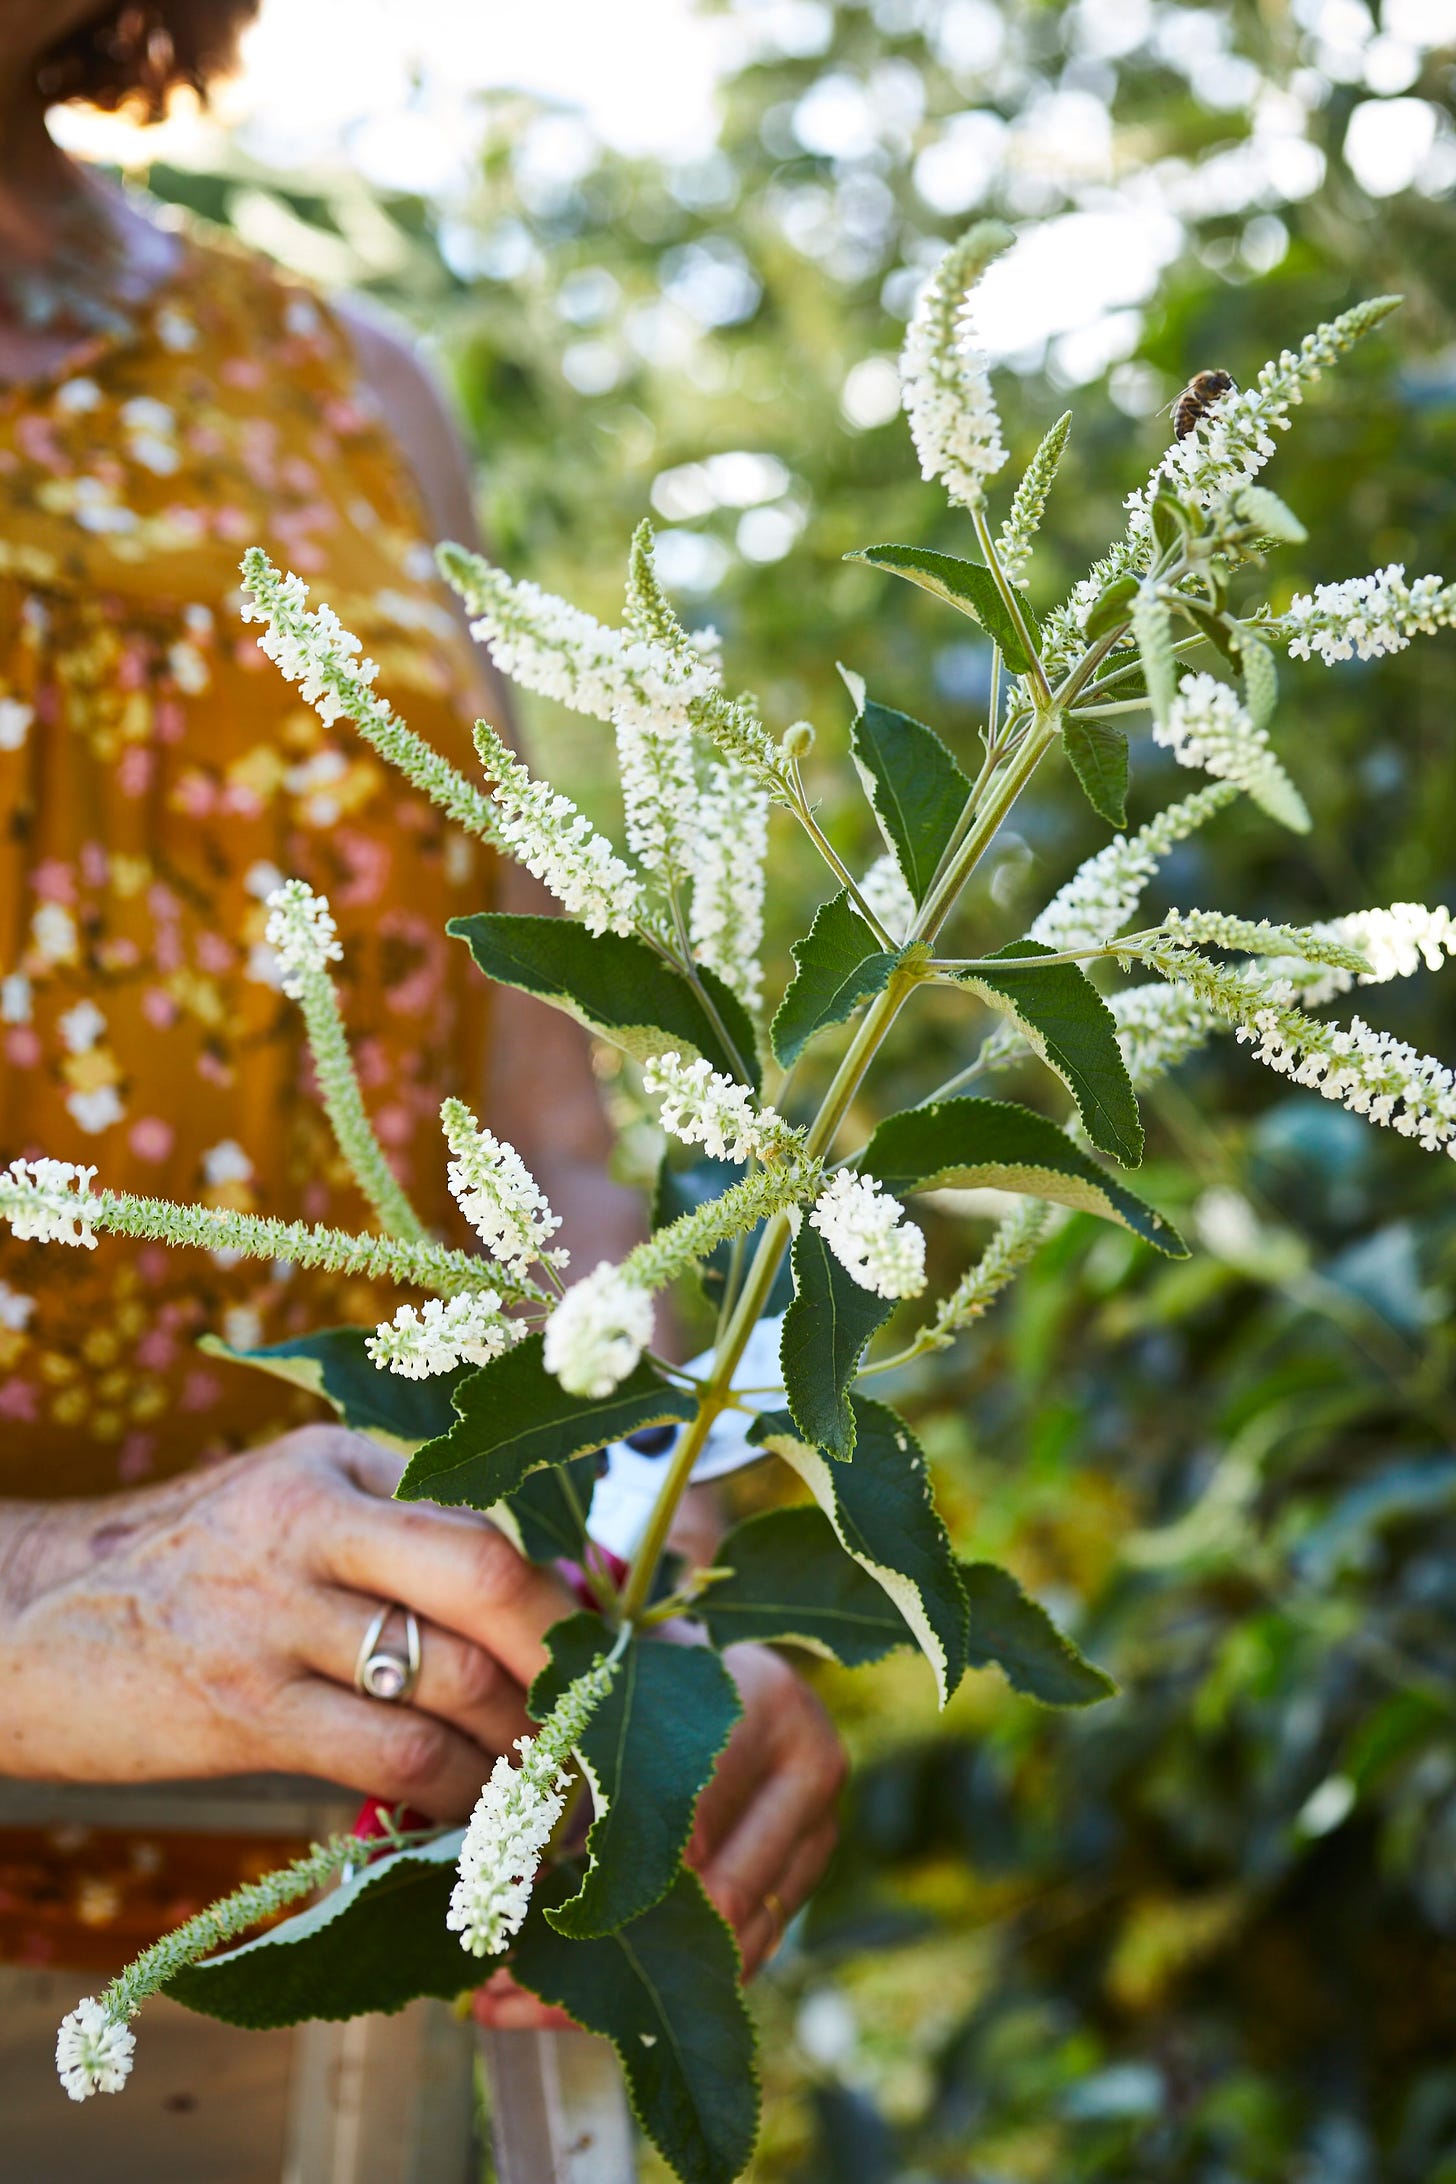 A woman wearing a ring holds a stem of blooming almond verbena. Her face is off-camera and the background is out of focus, leaving conspicuous green shapes behind the plant.